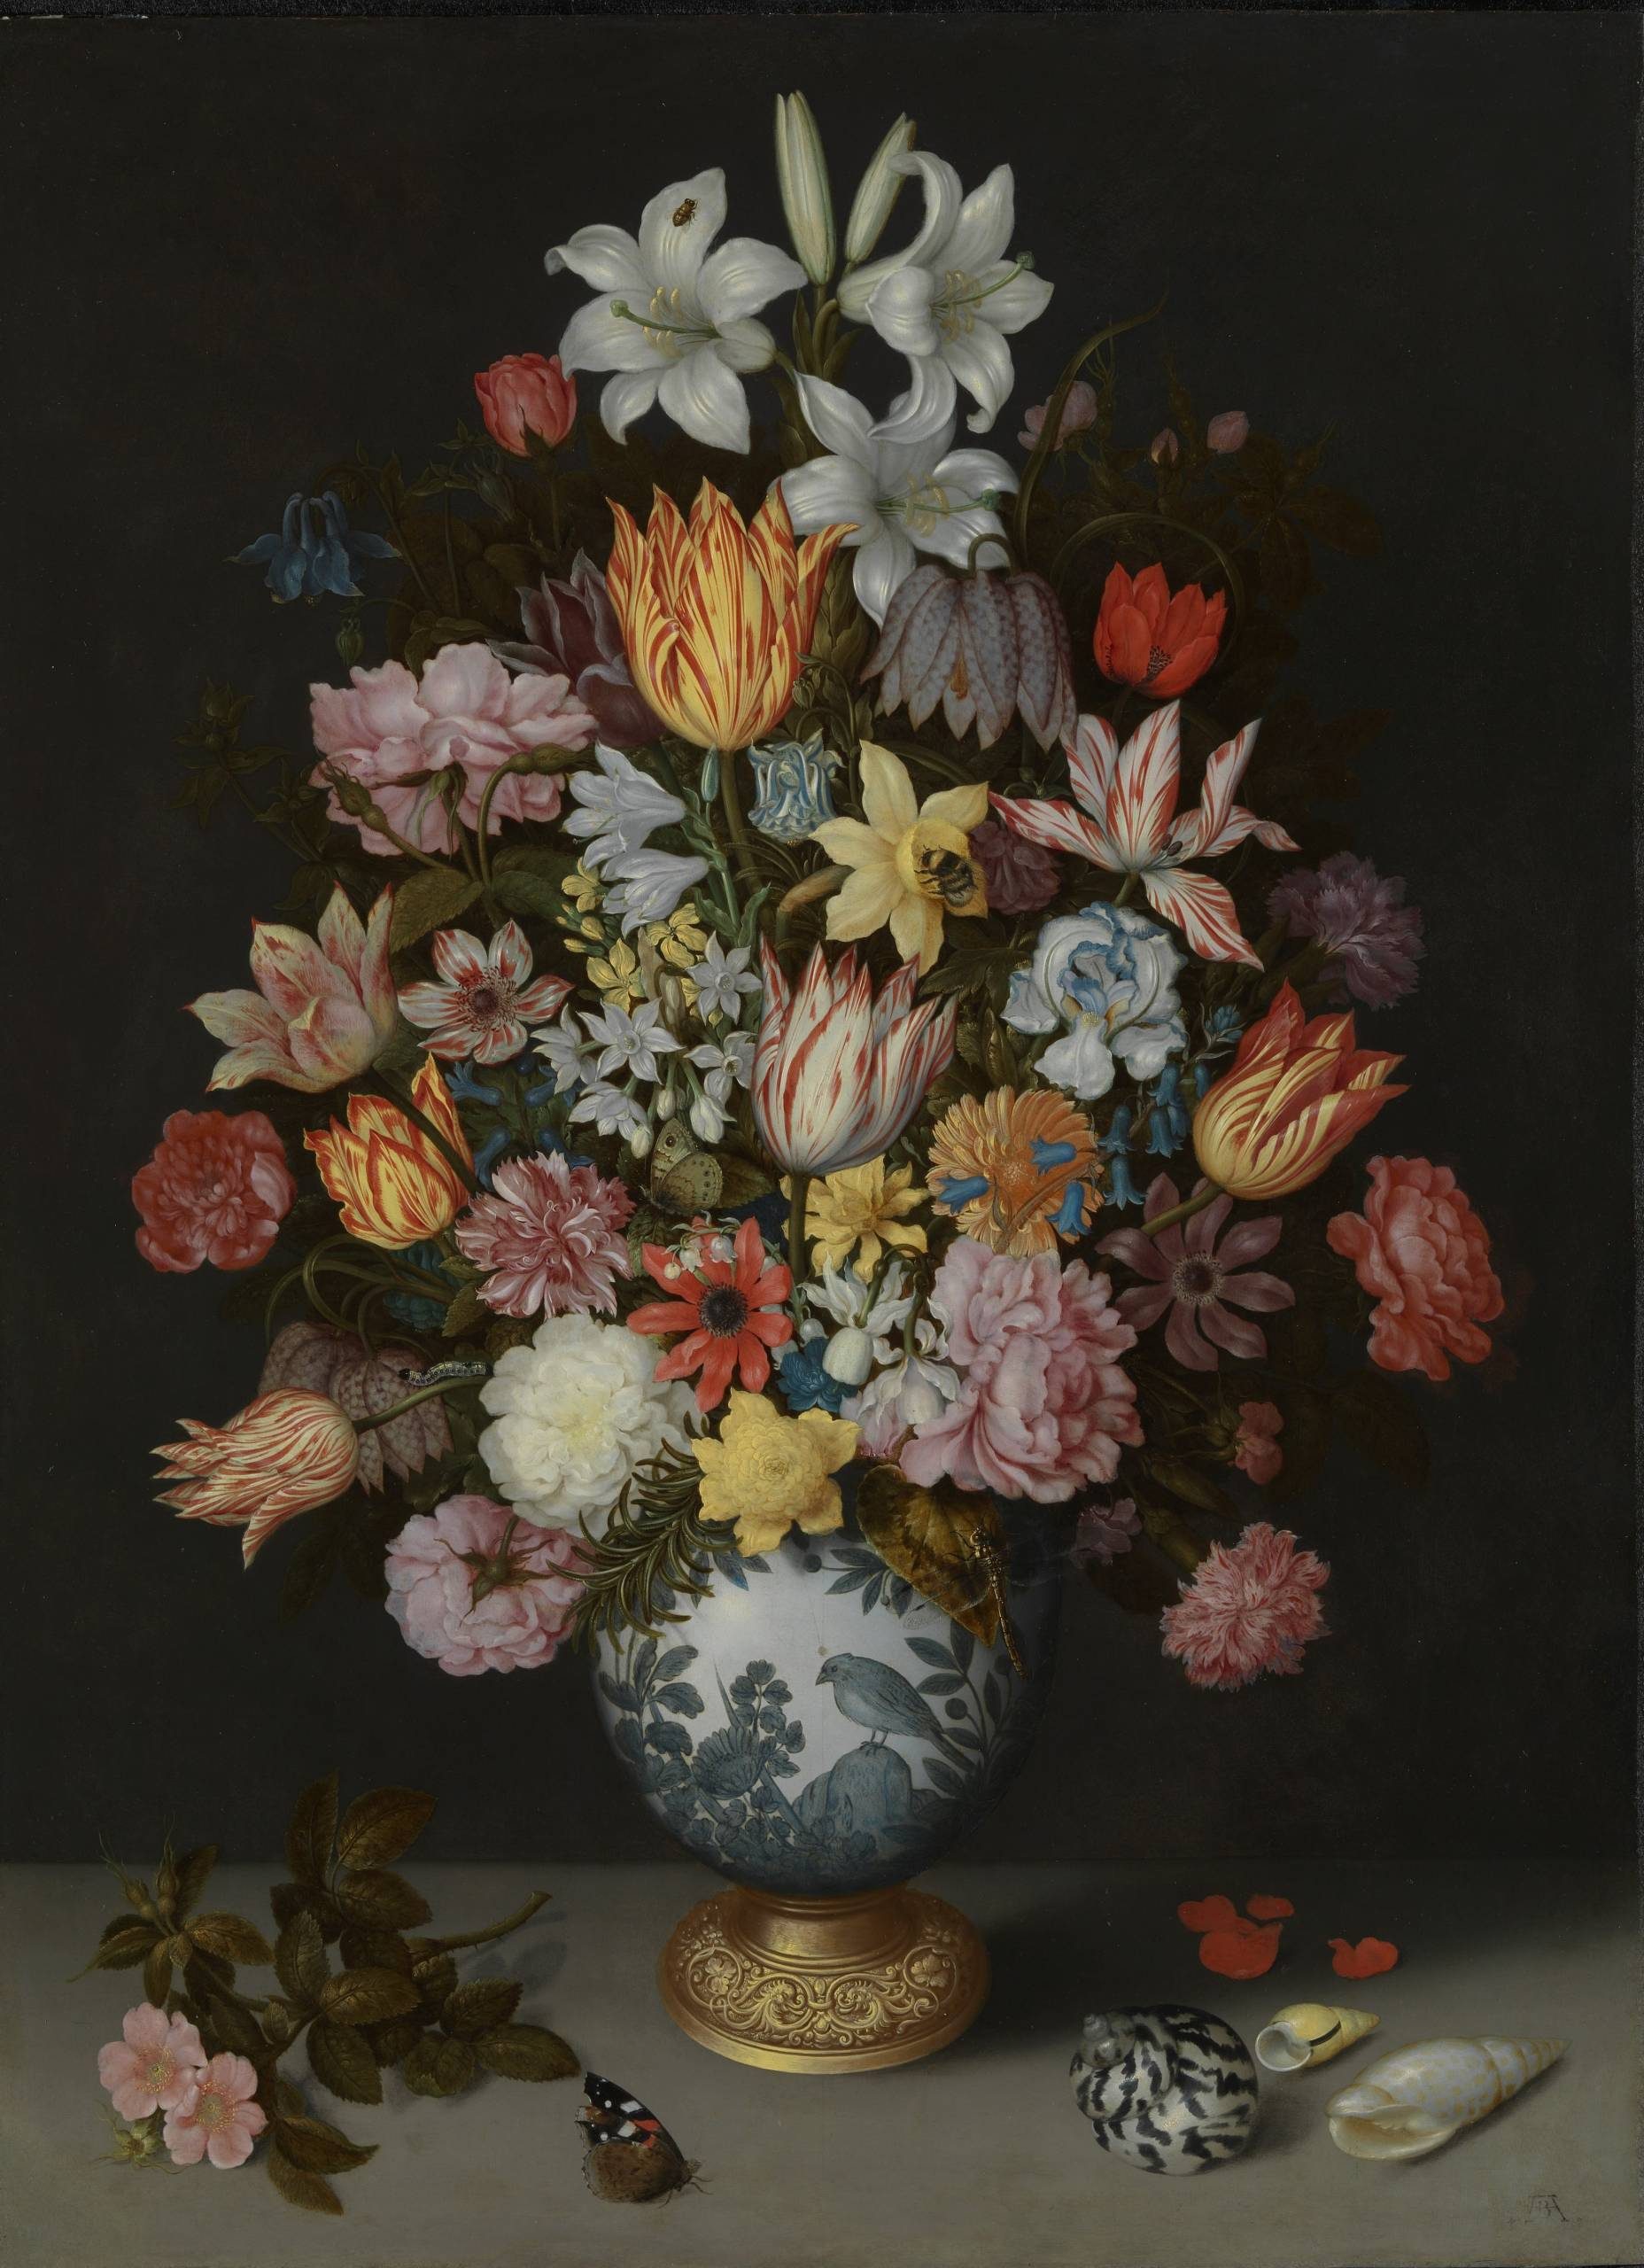 A still life painting of a vibrant flower arrangement. The vase contains a lush bouquet of various flowers in shades of red, pink, white, and yellow. The flowers include tulips, roses, lilies, and other blooms. The arrangement is set against a dark background, and there are a few small details like a butterfly and shells scattered around the base.